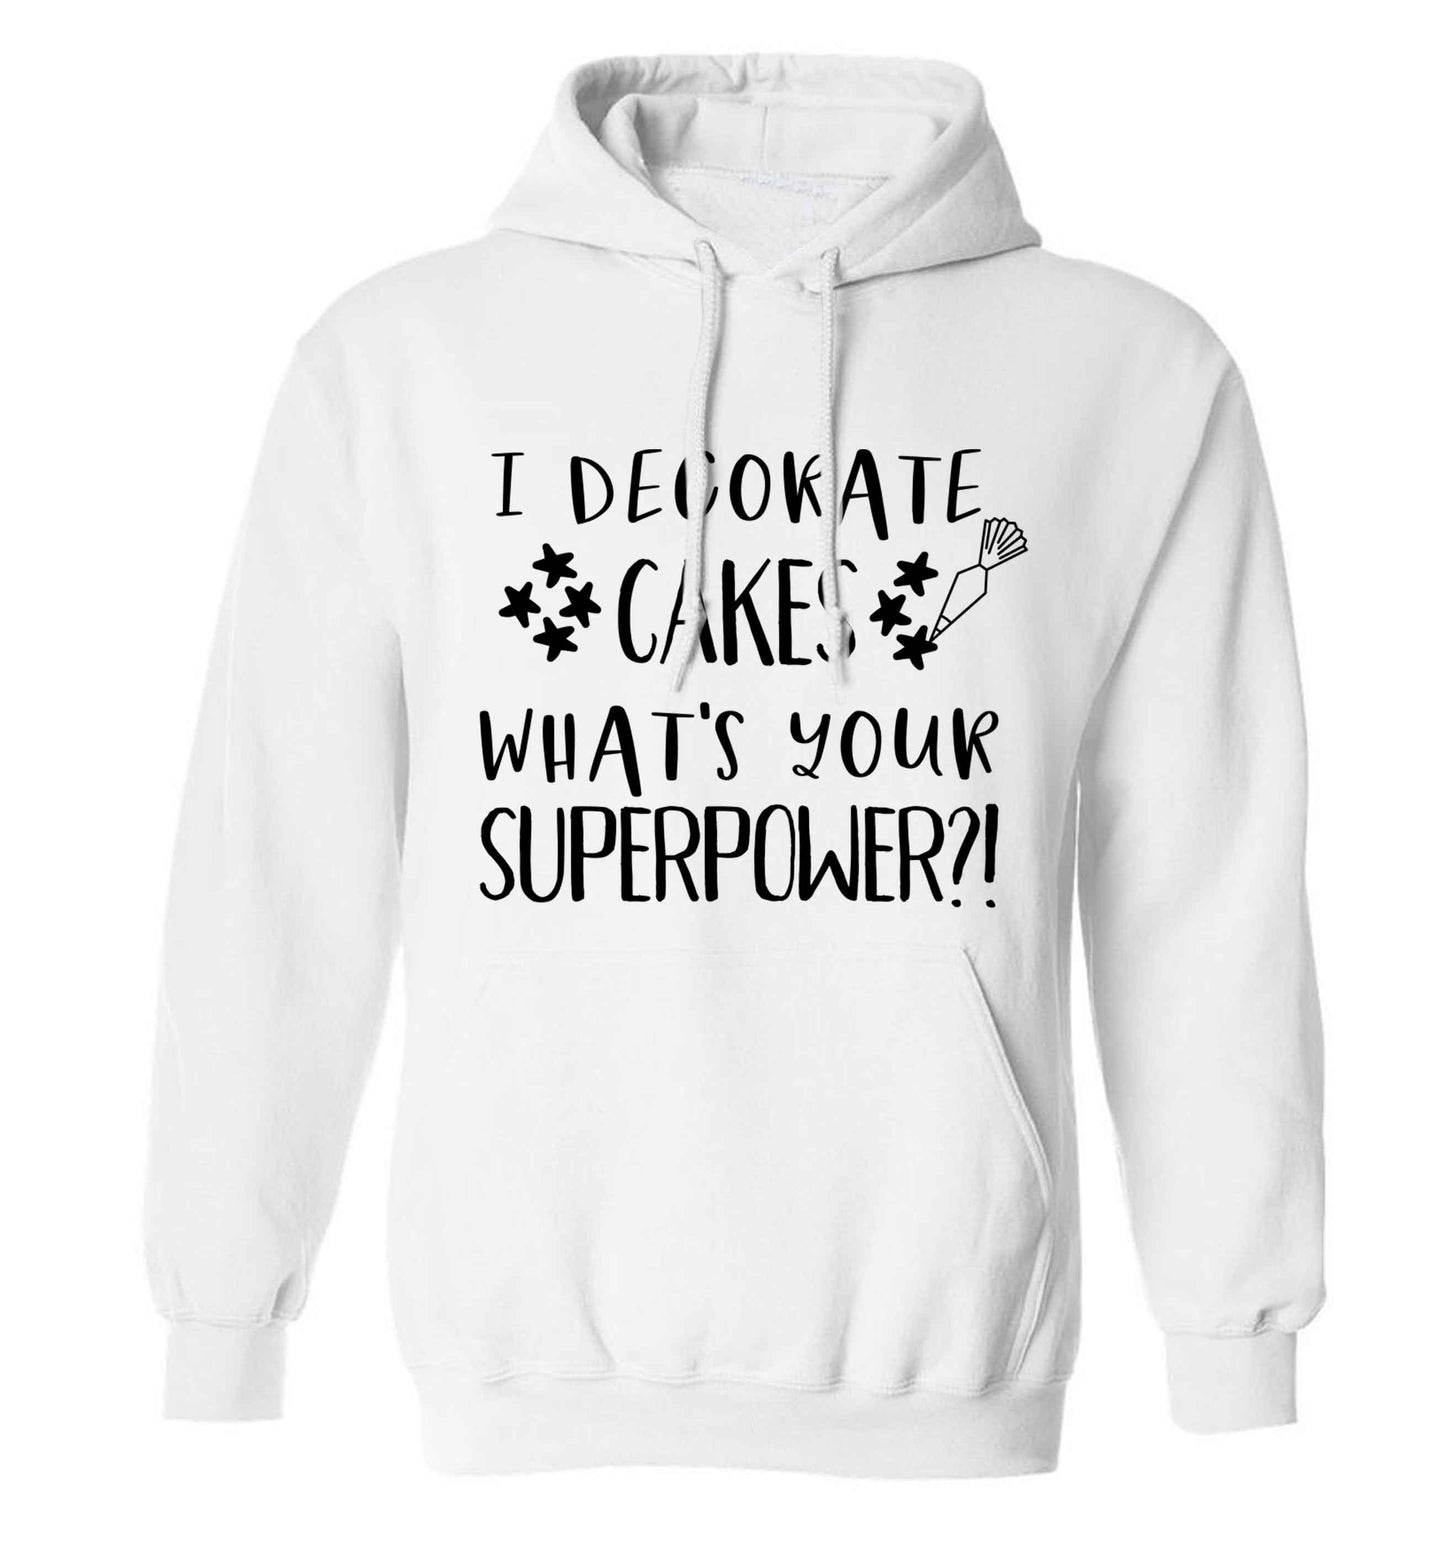 I decorate cakes what's your superpower?! adults unisex white hoodie 2XL